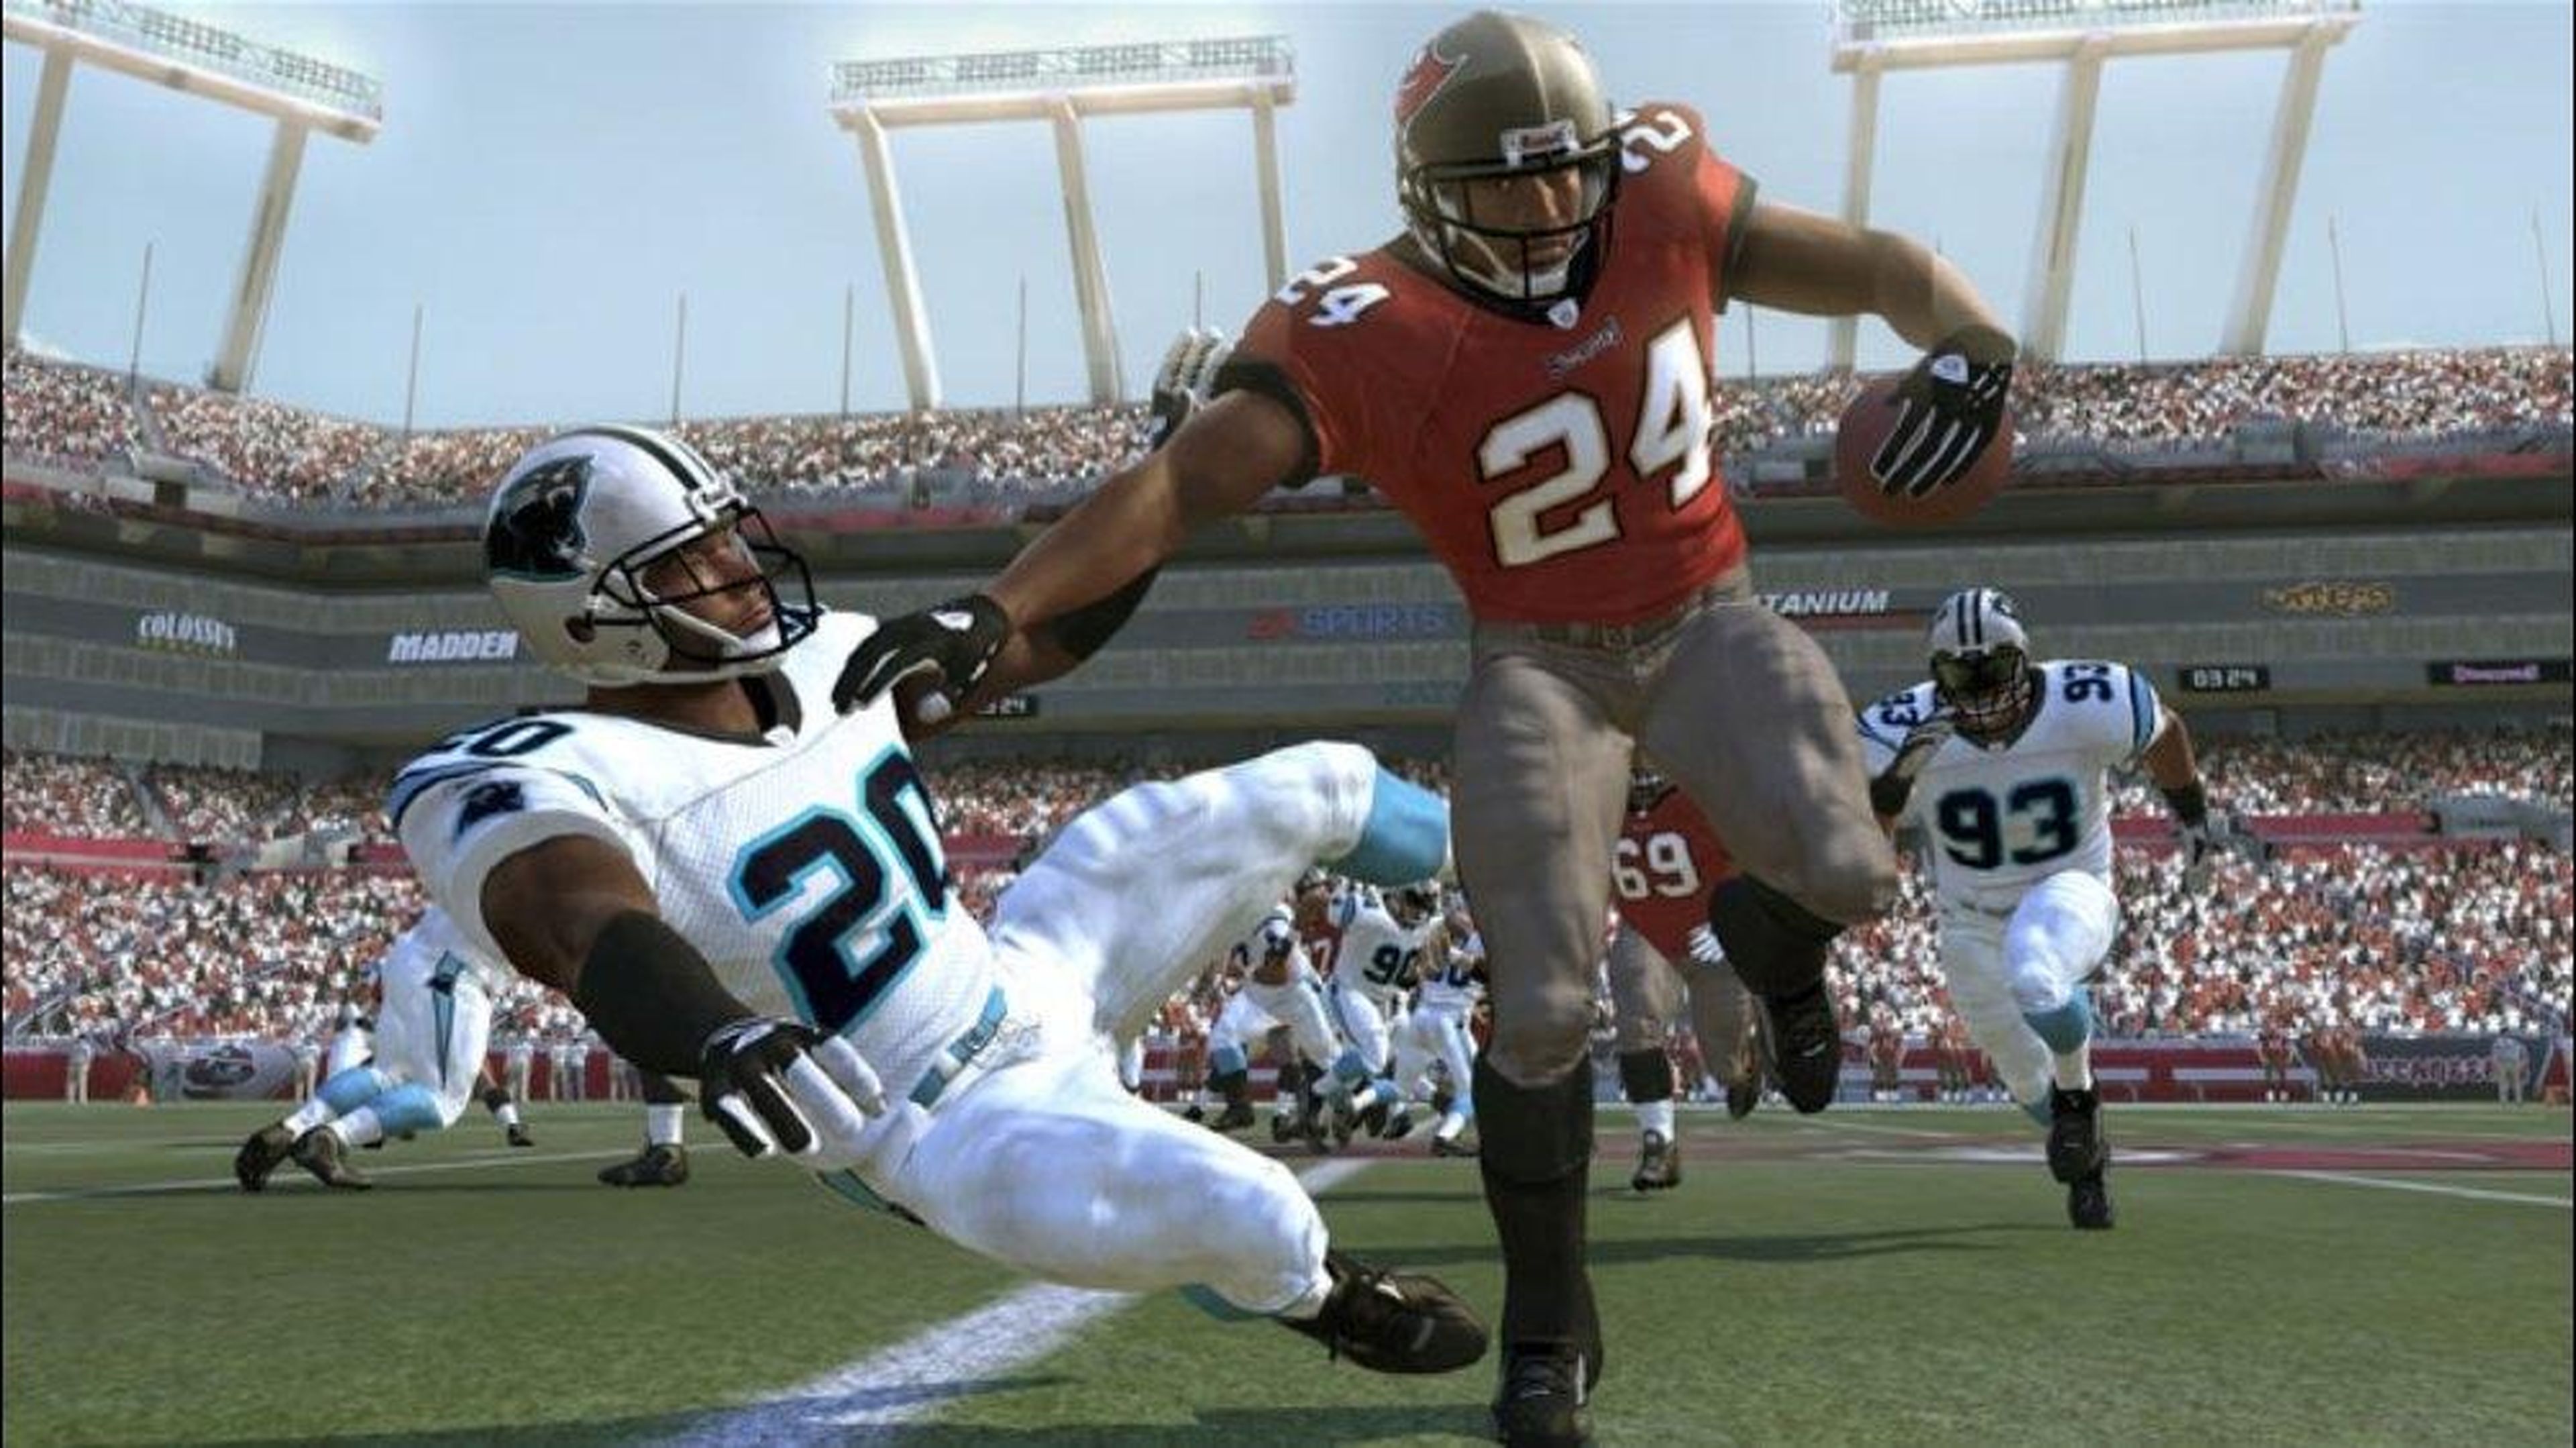 2006 — "Madden NFL 07" (PlayStation 2, PlayStation 3, Xbox, Xbox 360, GameCube, Nintendo Wii, PC, PlayStation Portable, Game Boy Advance, and Nintendo DS)